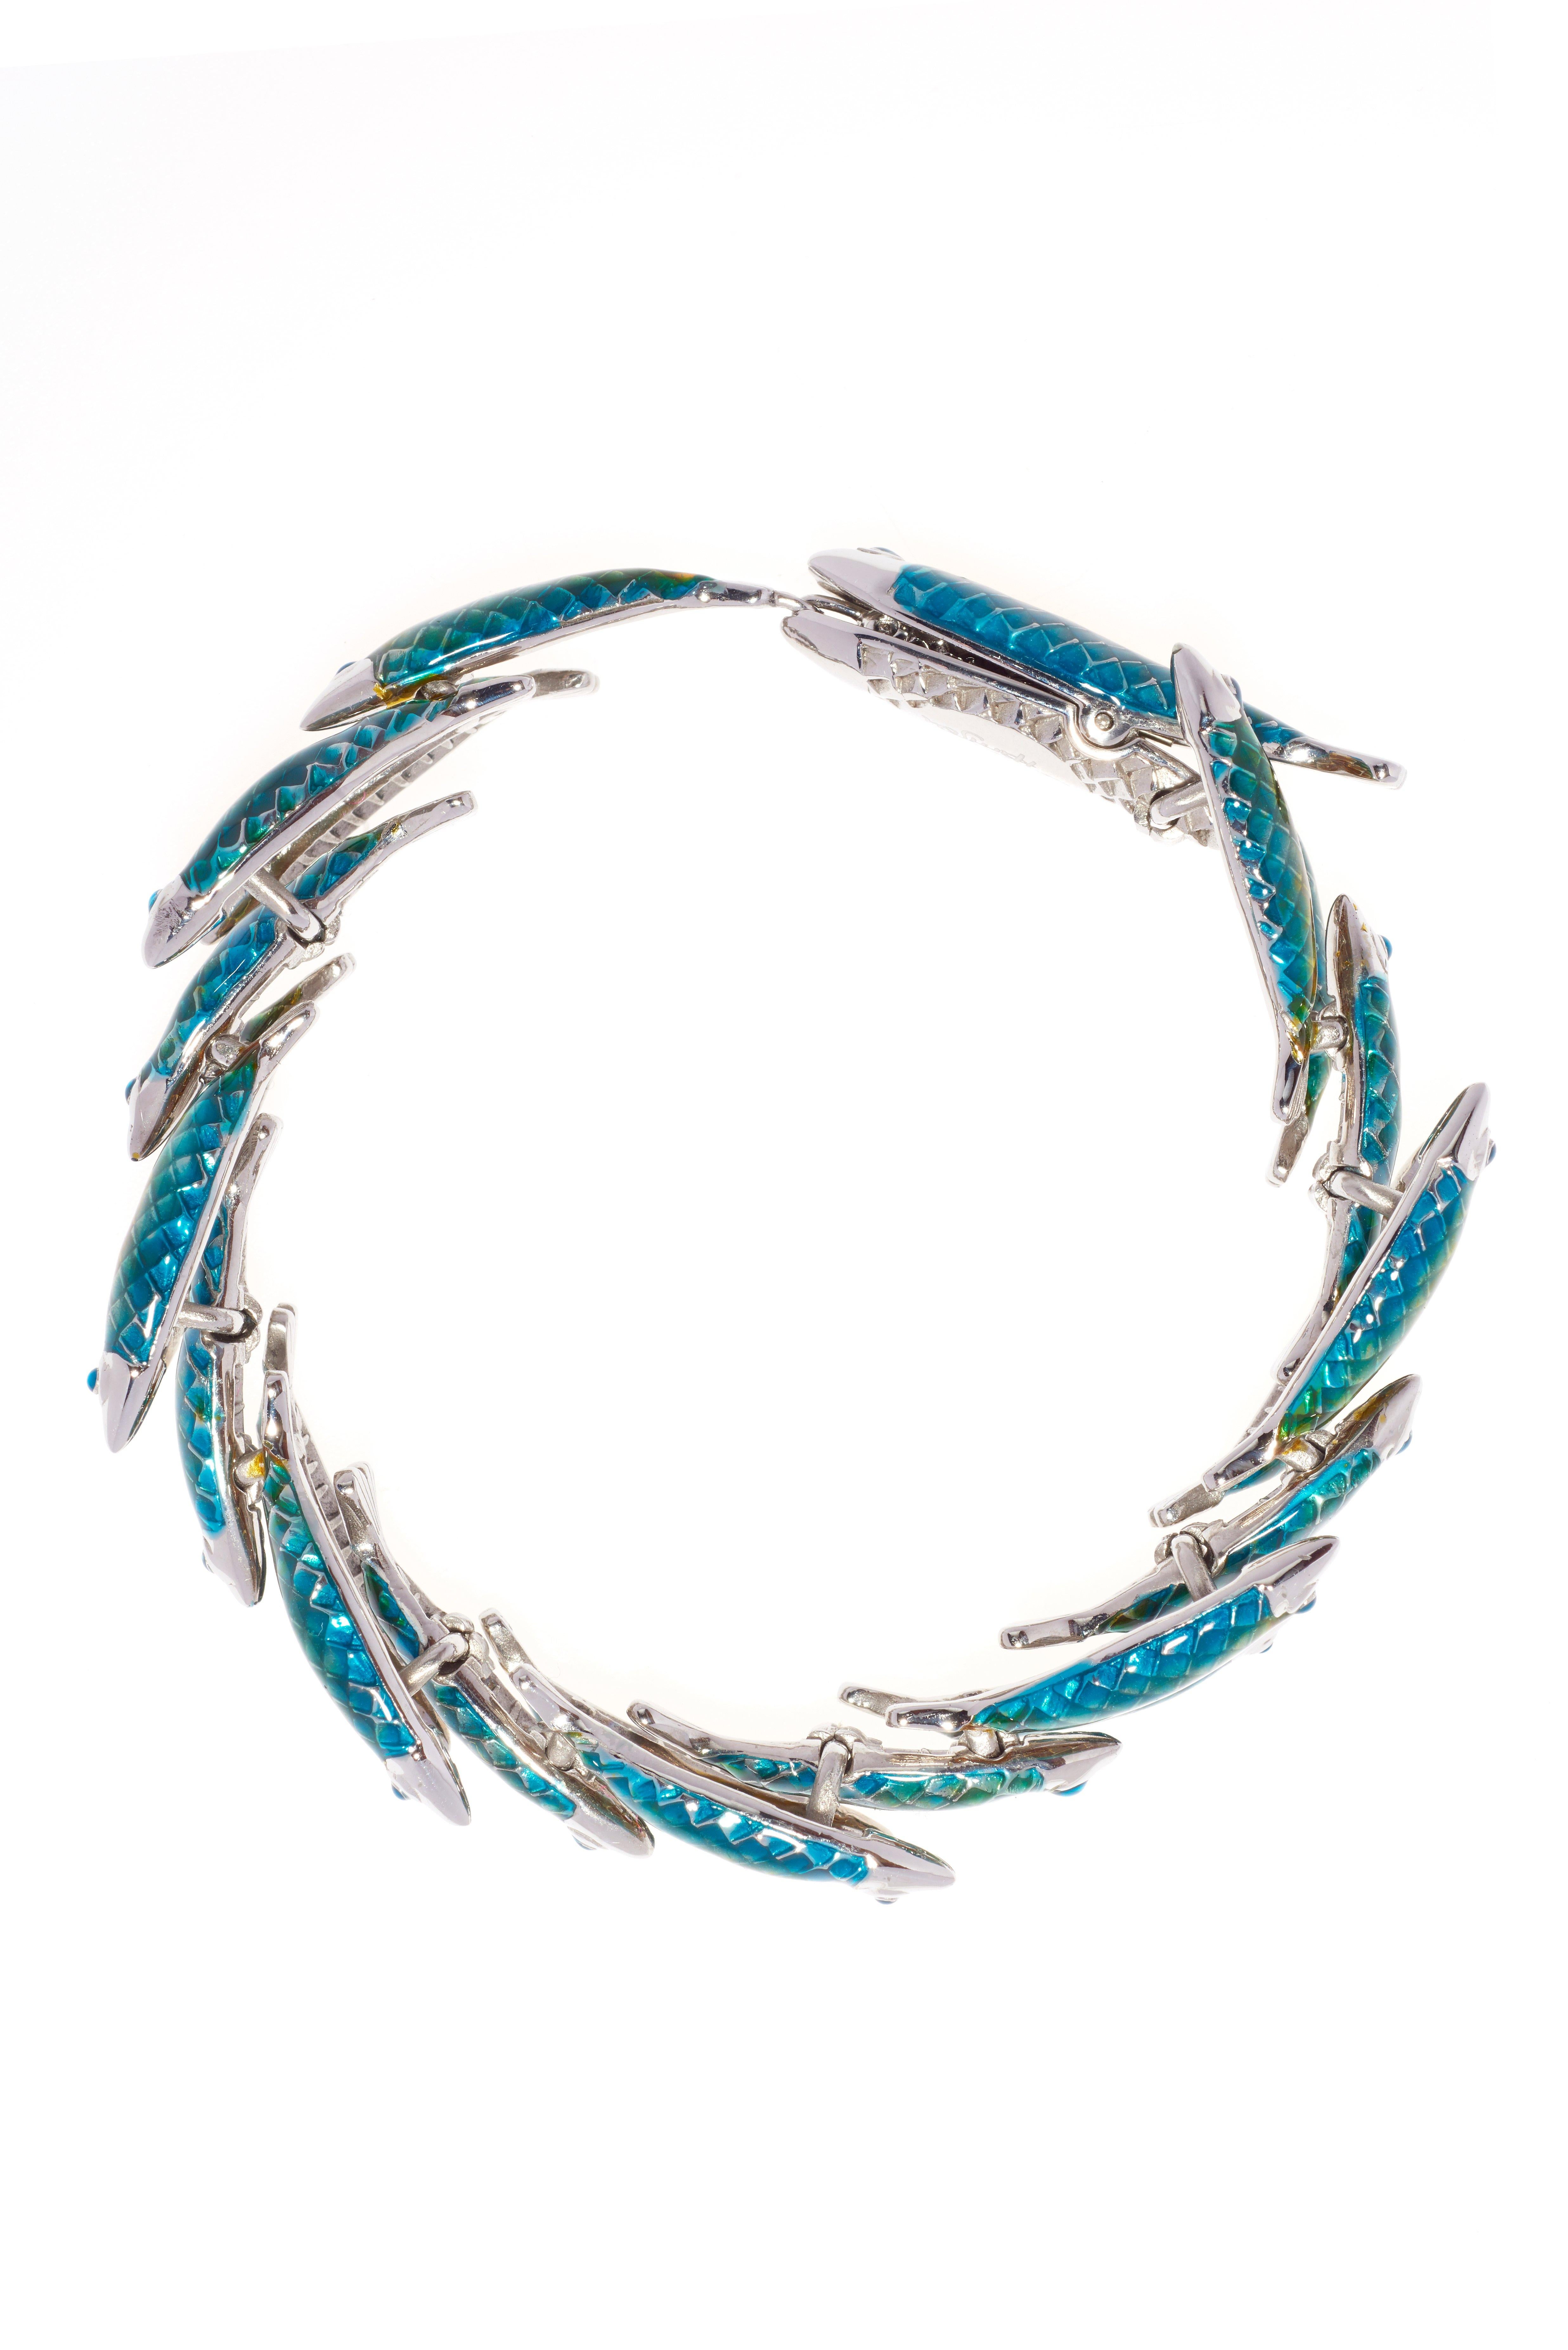 Simon Harrison Green Ombre Enamel Small Electra Fish Bracelet In New Condition For Sale In London, GB